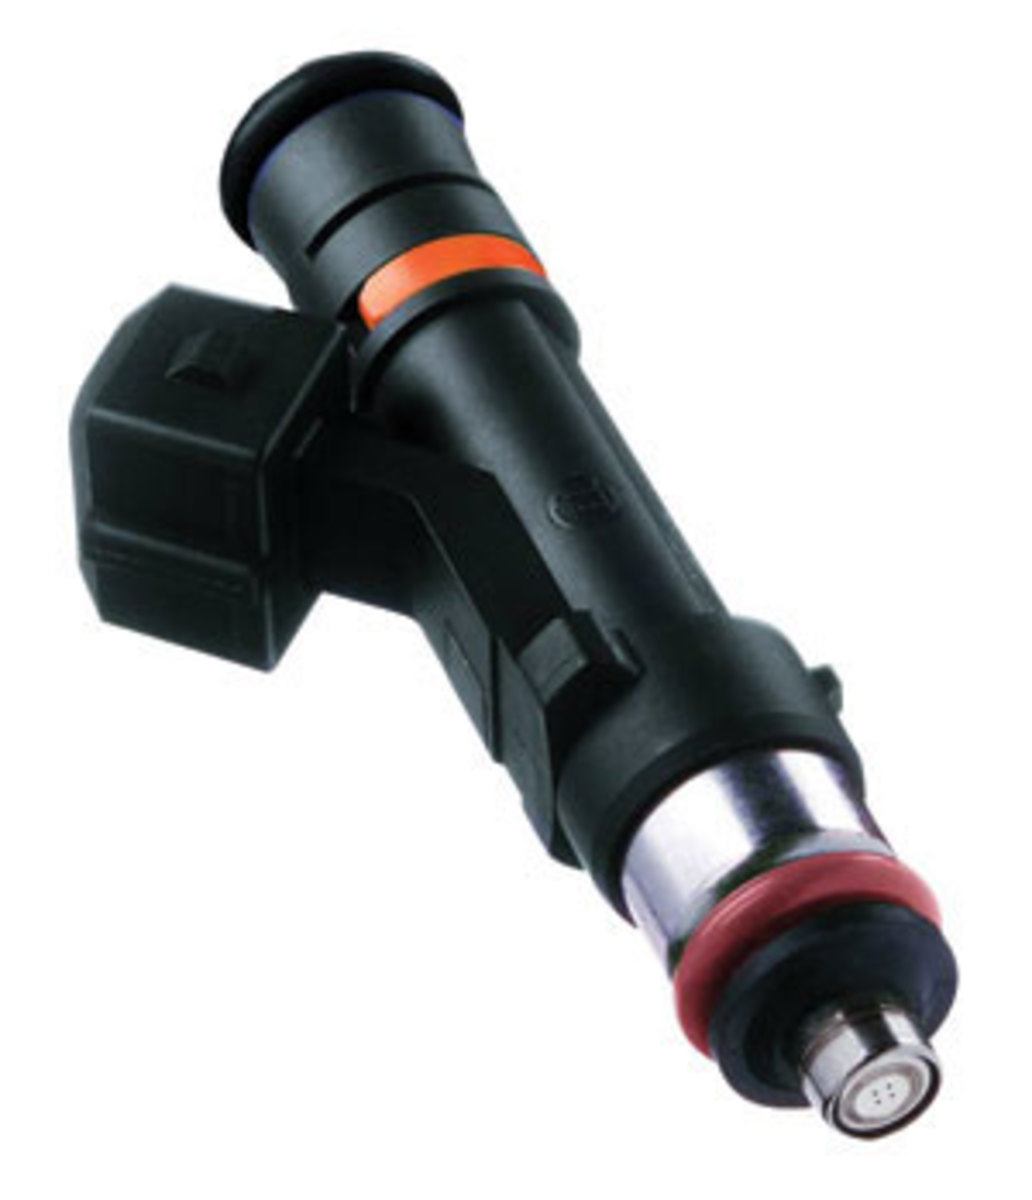 Typical Fuel Injector - Actuator